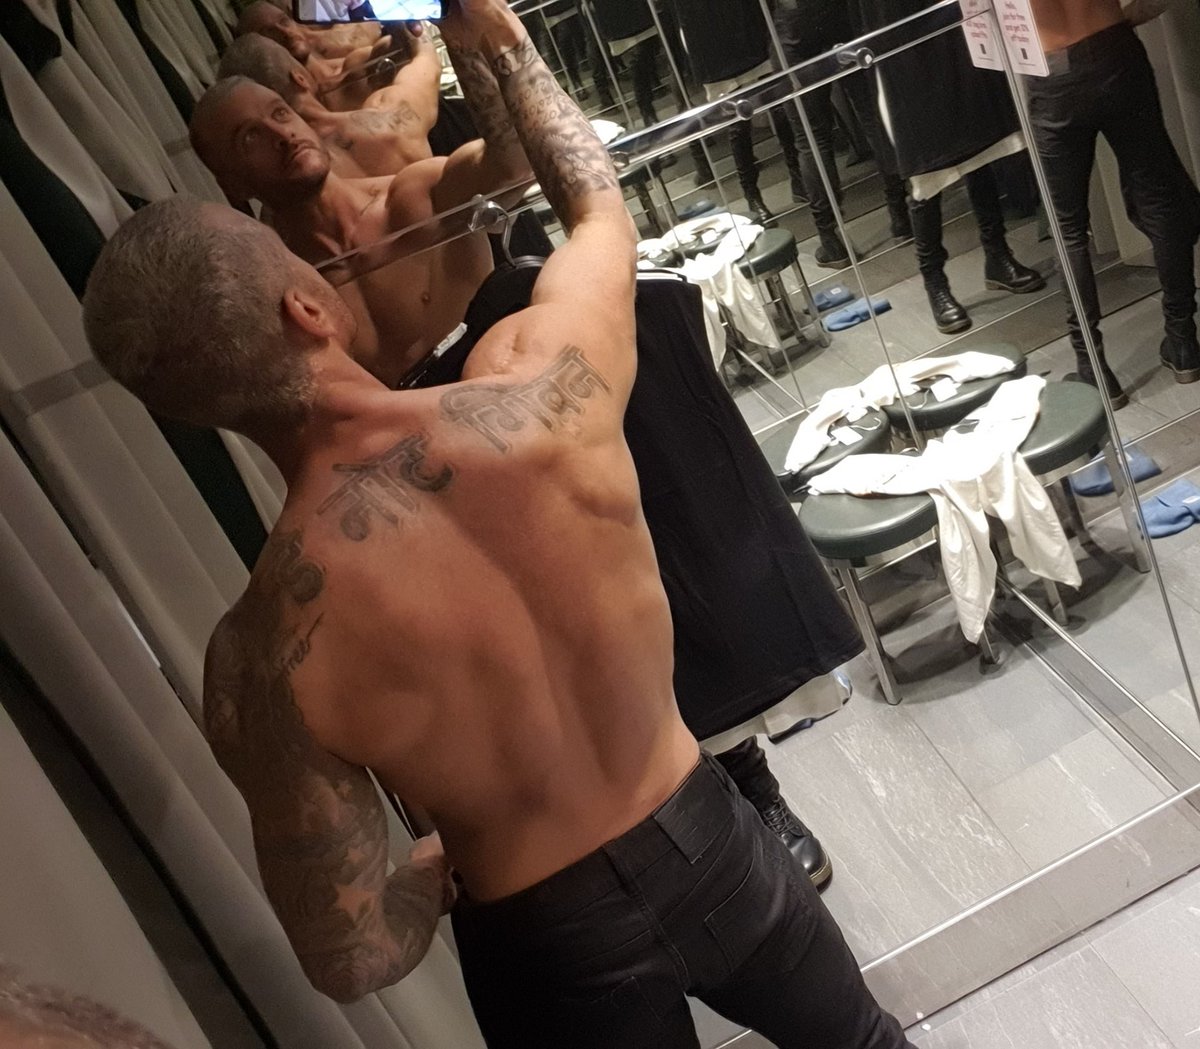 I could insert a profound quote about 'not looking back', but really I was just trying on some t-shirts 😂
#back #myback #backmuscles #backtattoos #changingroom #manofstyle #changingroomselfie #shopping #tryingonclothes #maturemen #styleover40 #deltoids #swoleisthegoal #rearview